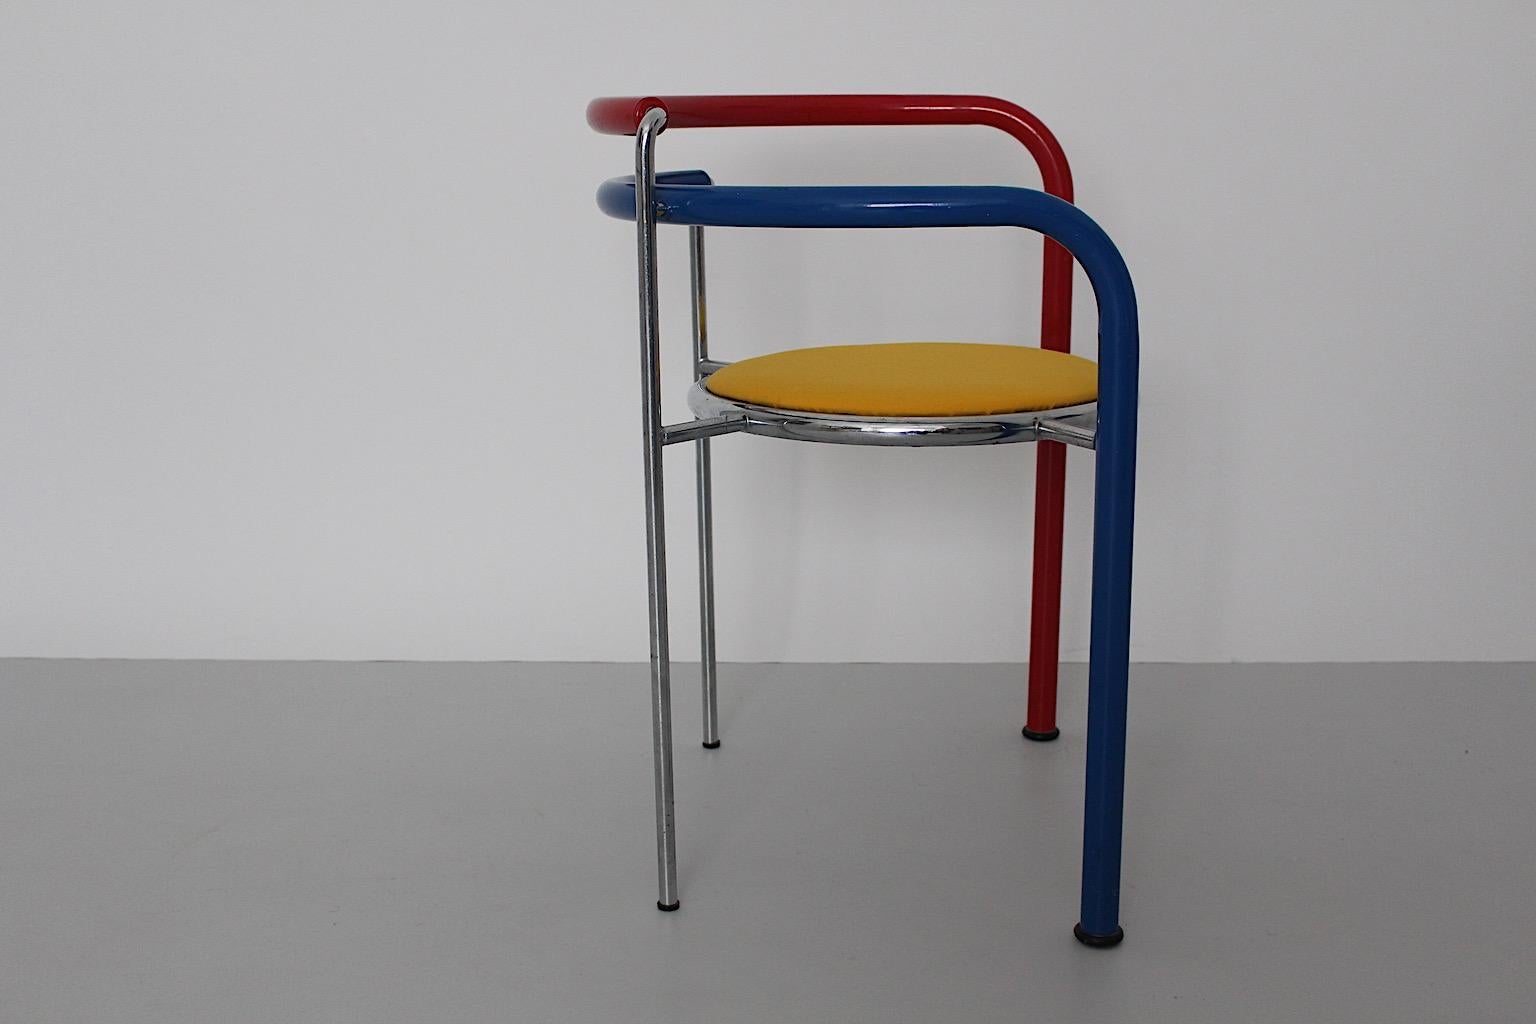 Fabric Pop Art Dining Chairs and Table Rud Thygesen Johnny Sorensen Denmark c 1989 For Sale